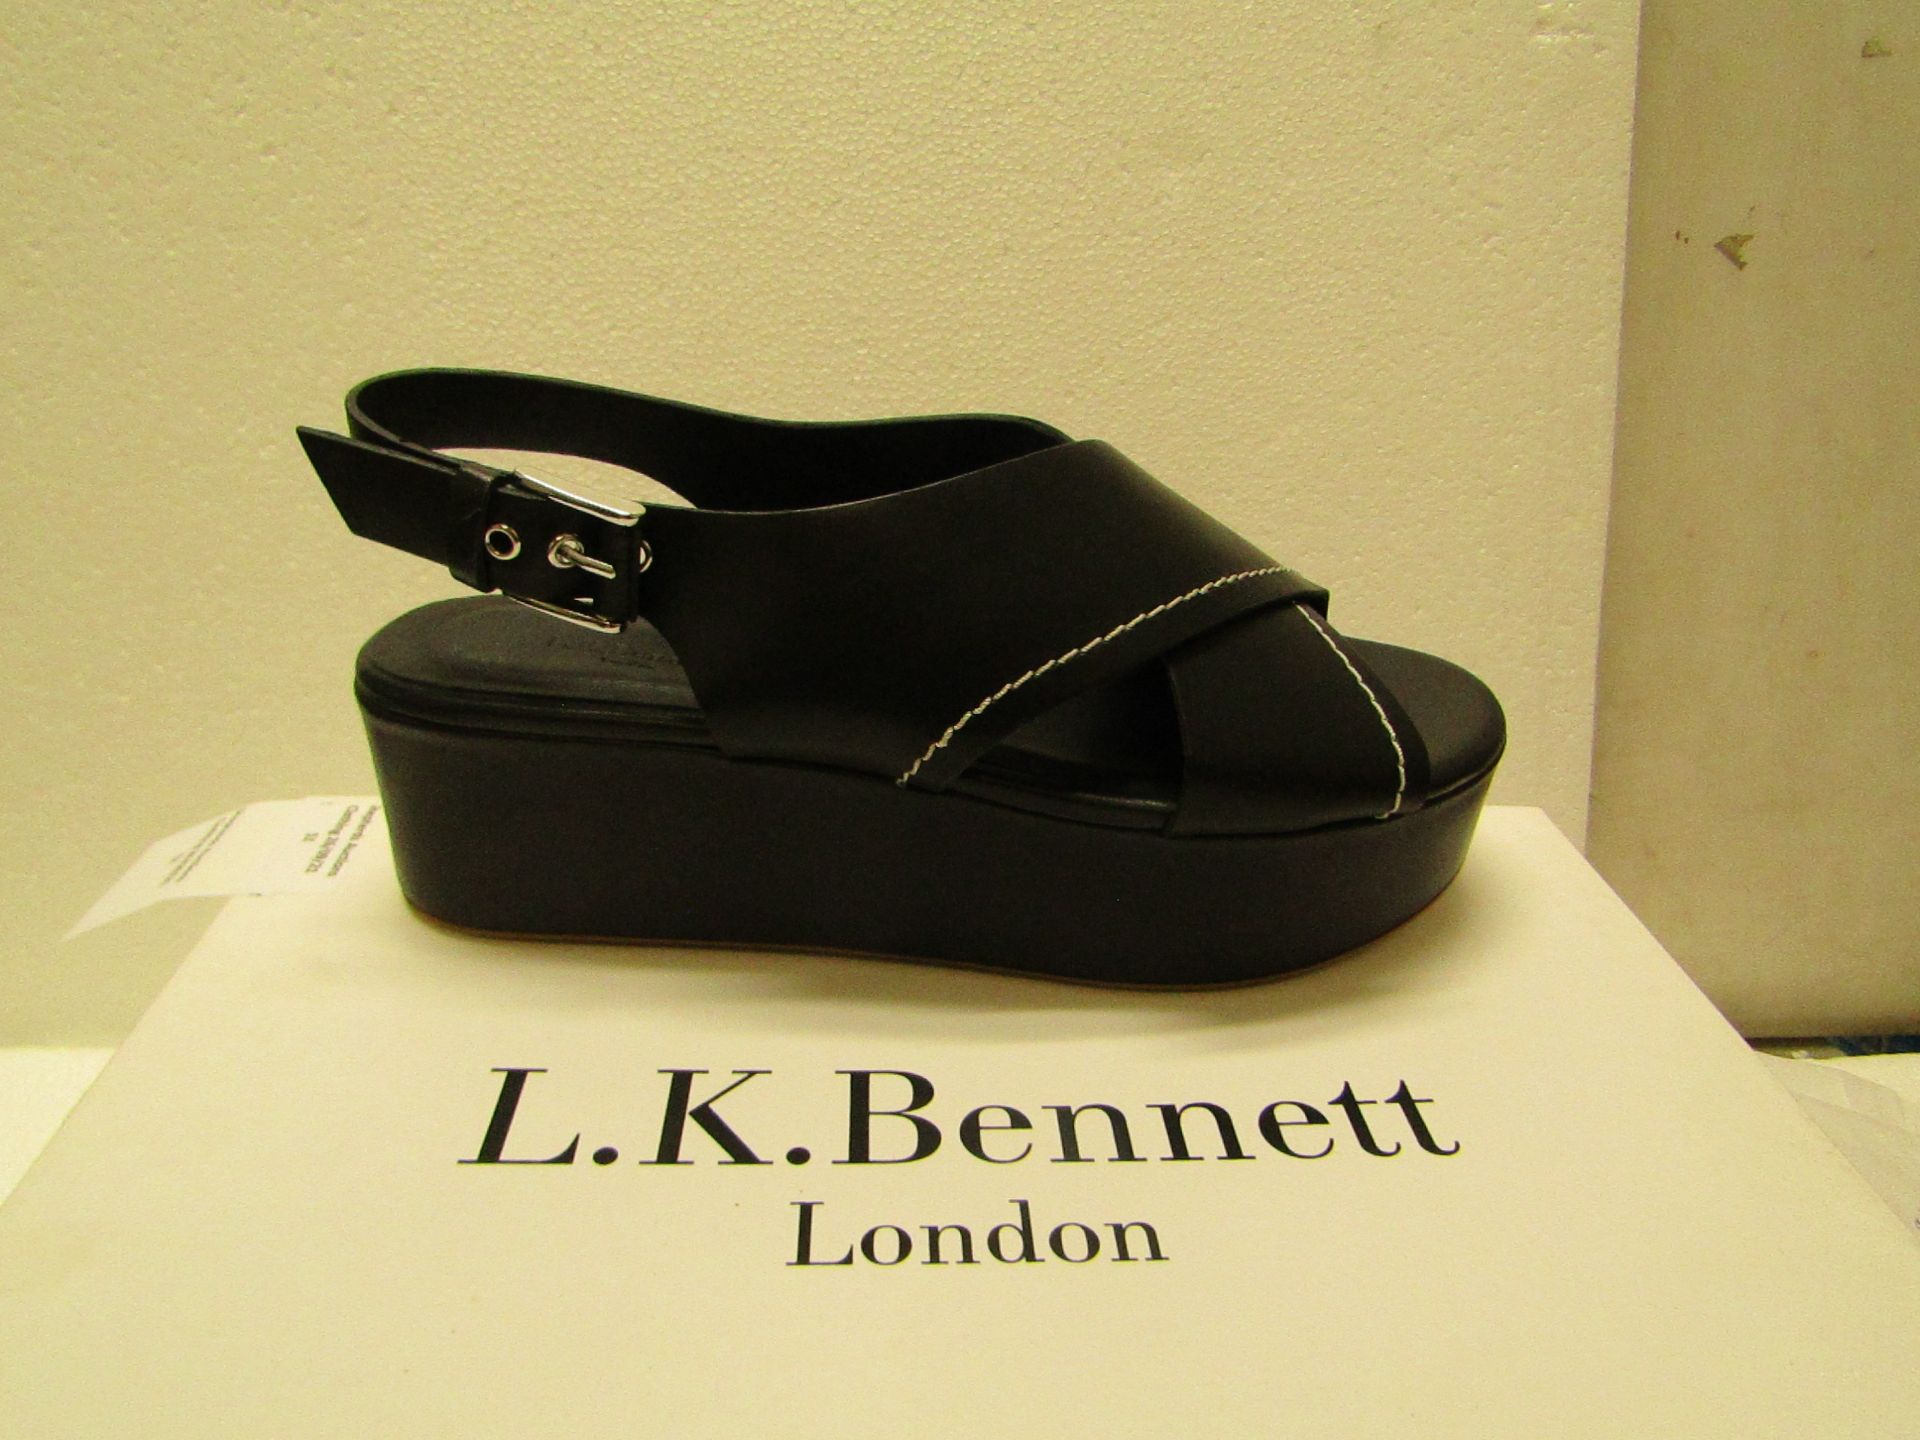 L K Bennett London Sima Black Veg Leather Shoes size 38 RRP £250 new & boxed see image for design